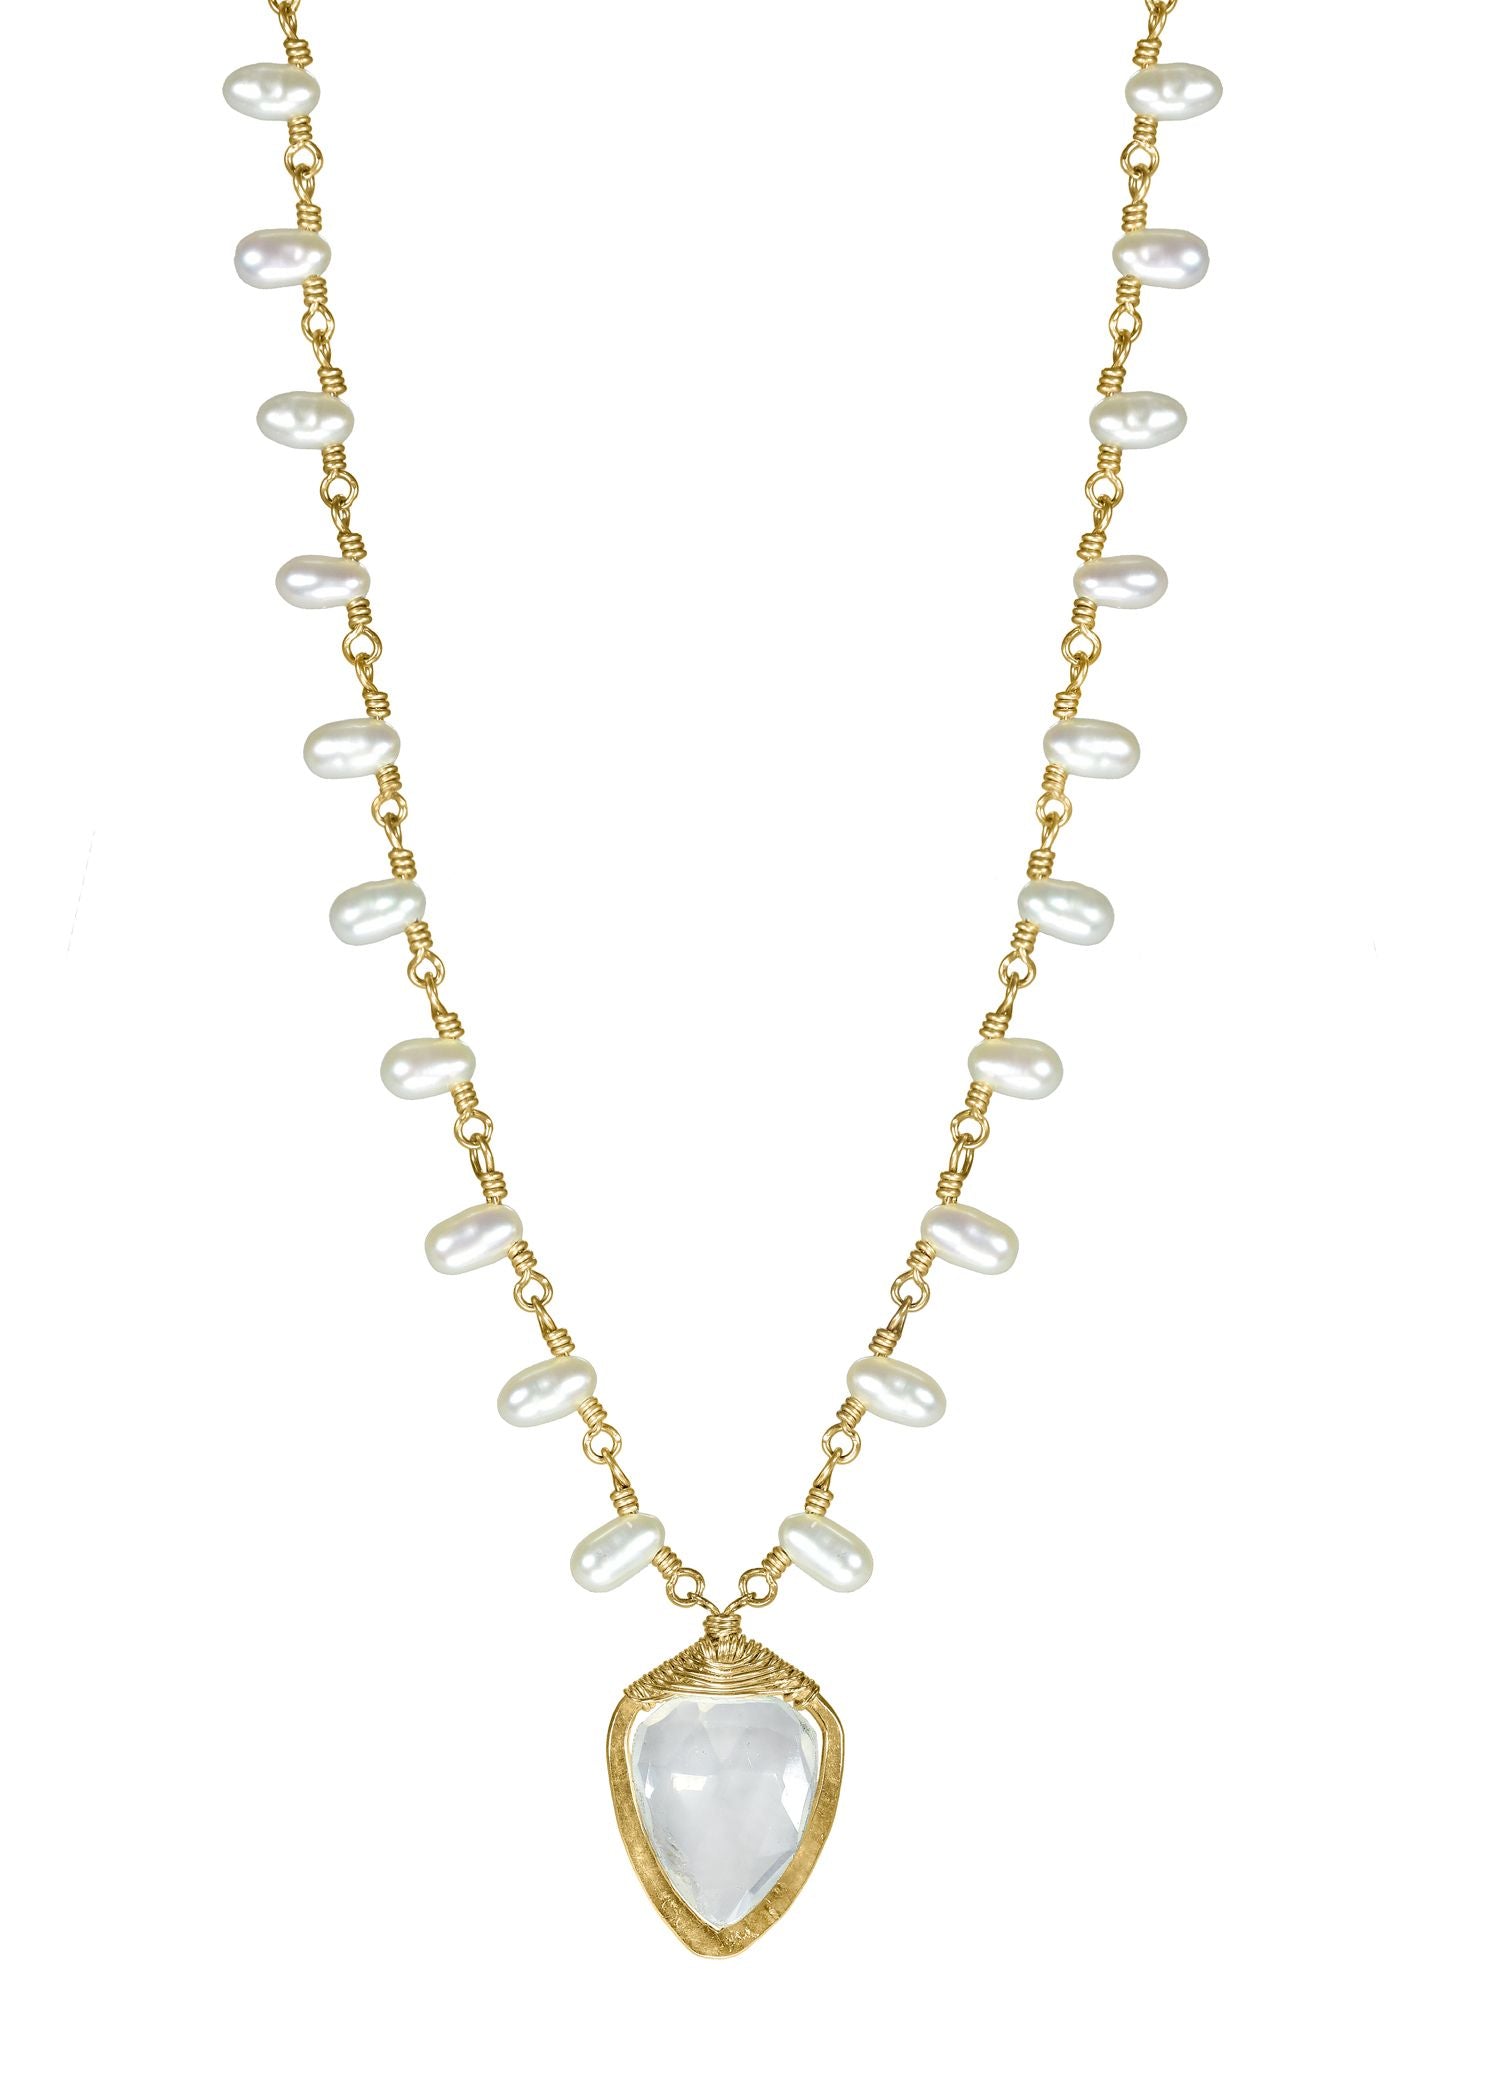 White moonstone Fresh water pearl 14k gold fill Necklace measures 17-1/4” in length Pendant measures 11/16"in length and 7/16" in width Handmade in our Los Angeles studio